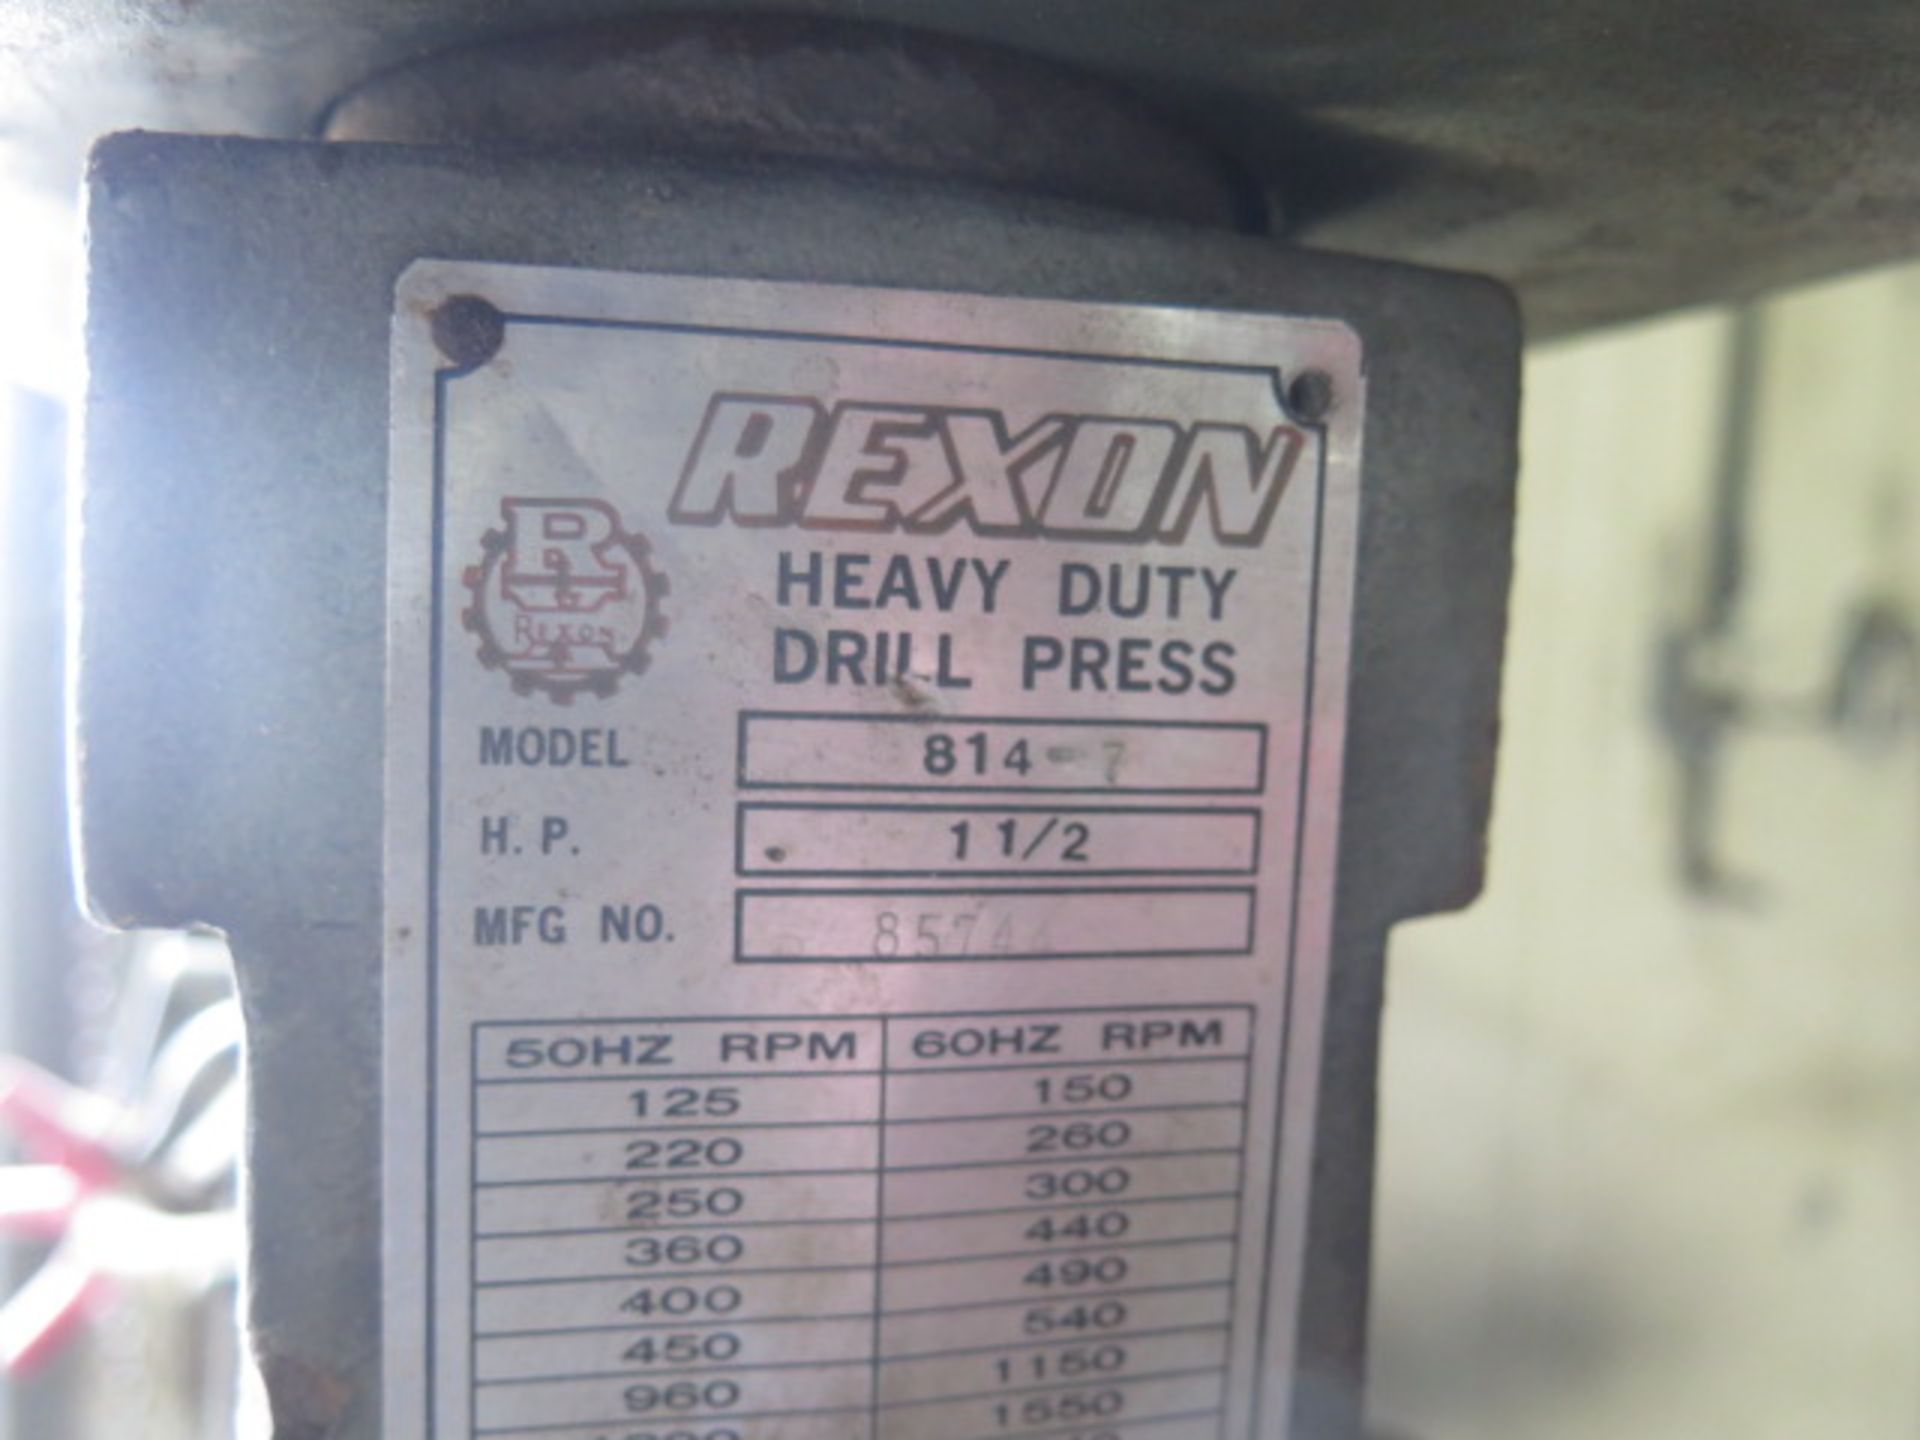 Rexon mdl. 814-7 Pedestal Drill Press (SOLD AS-IS - NO WARRANTY) - Image 5 of 5